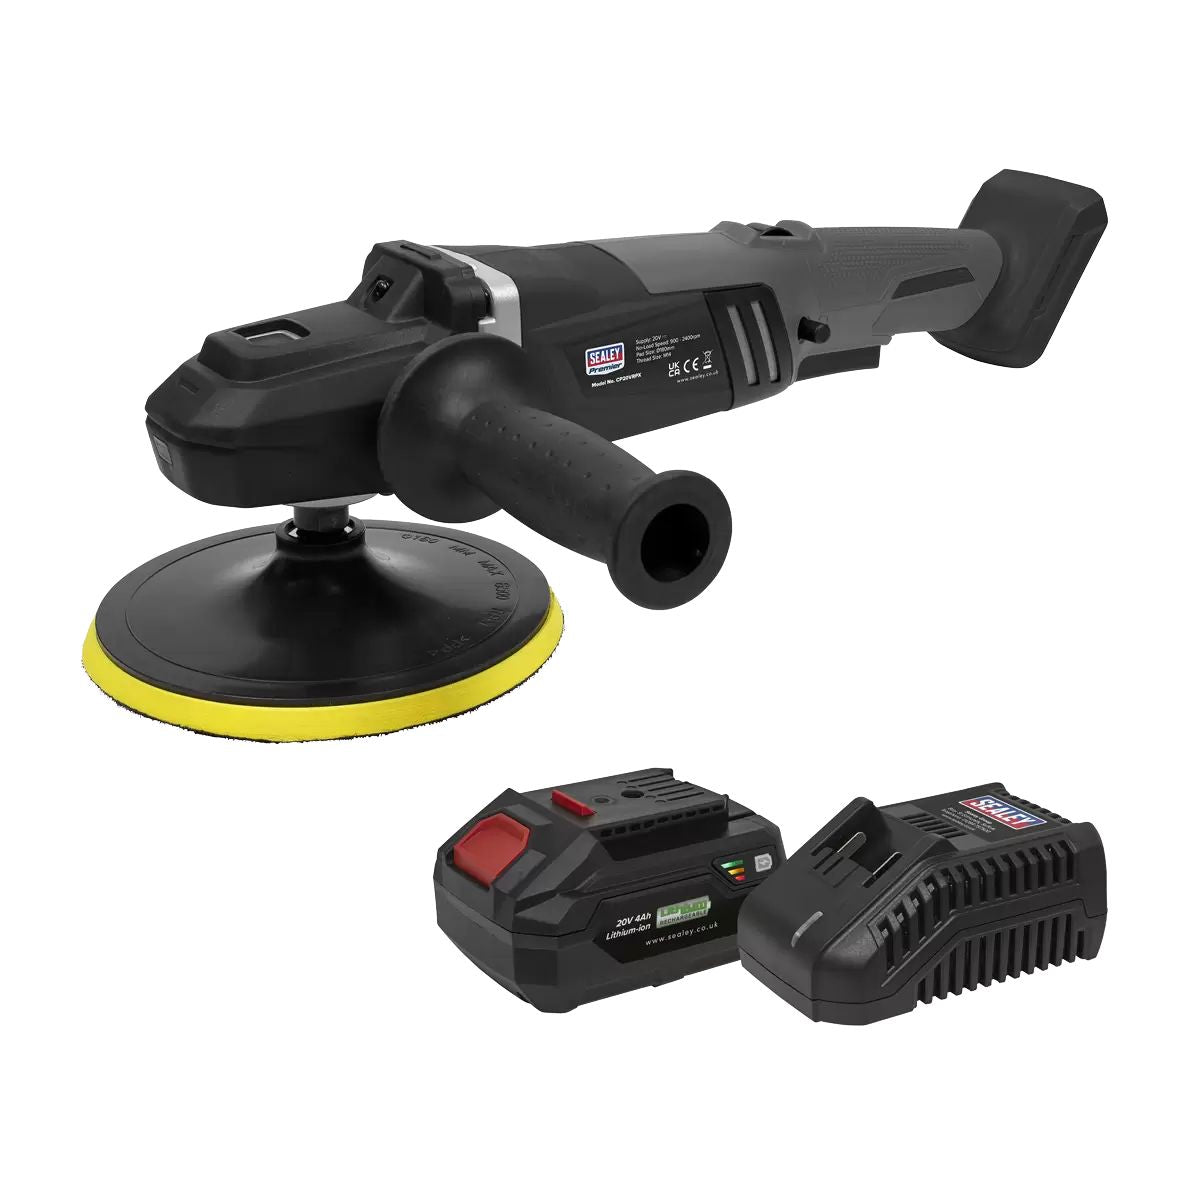 Sealey CP20VRPXKIT1 20V Brushless Rotary Polisher 180mm Kit With Battery & Charger